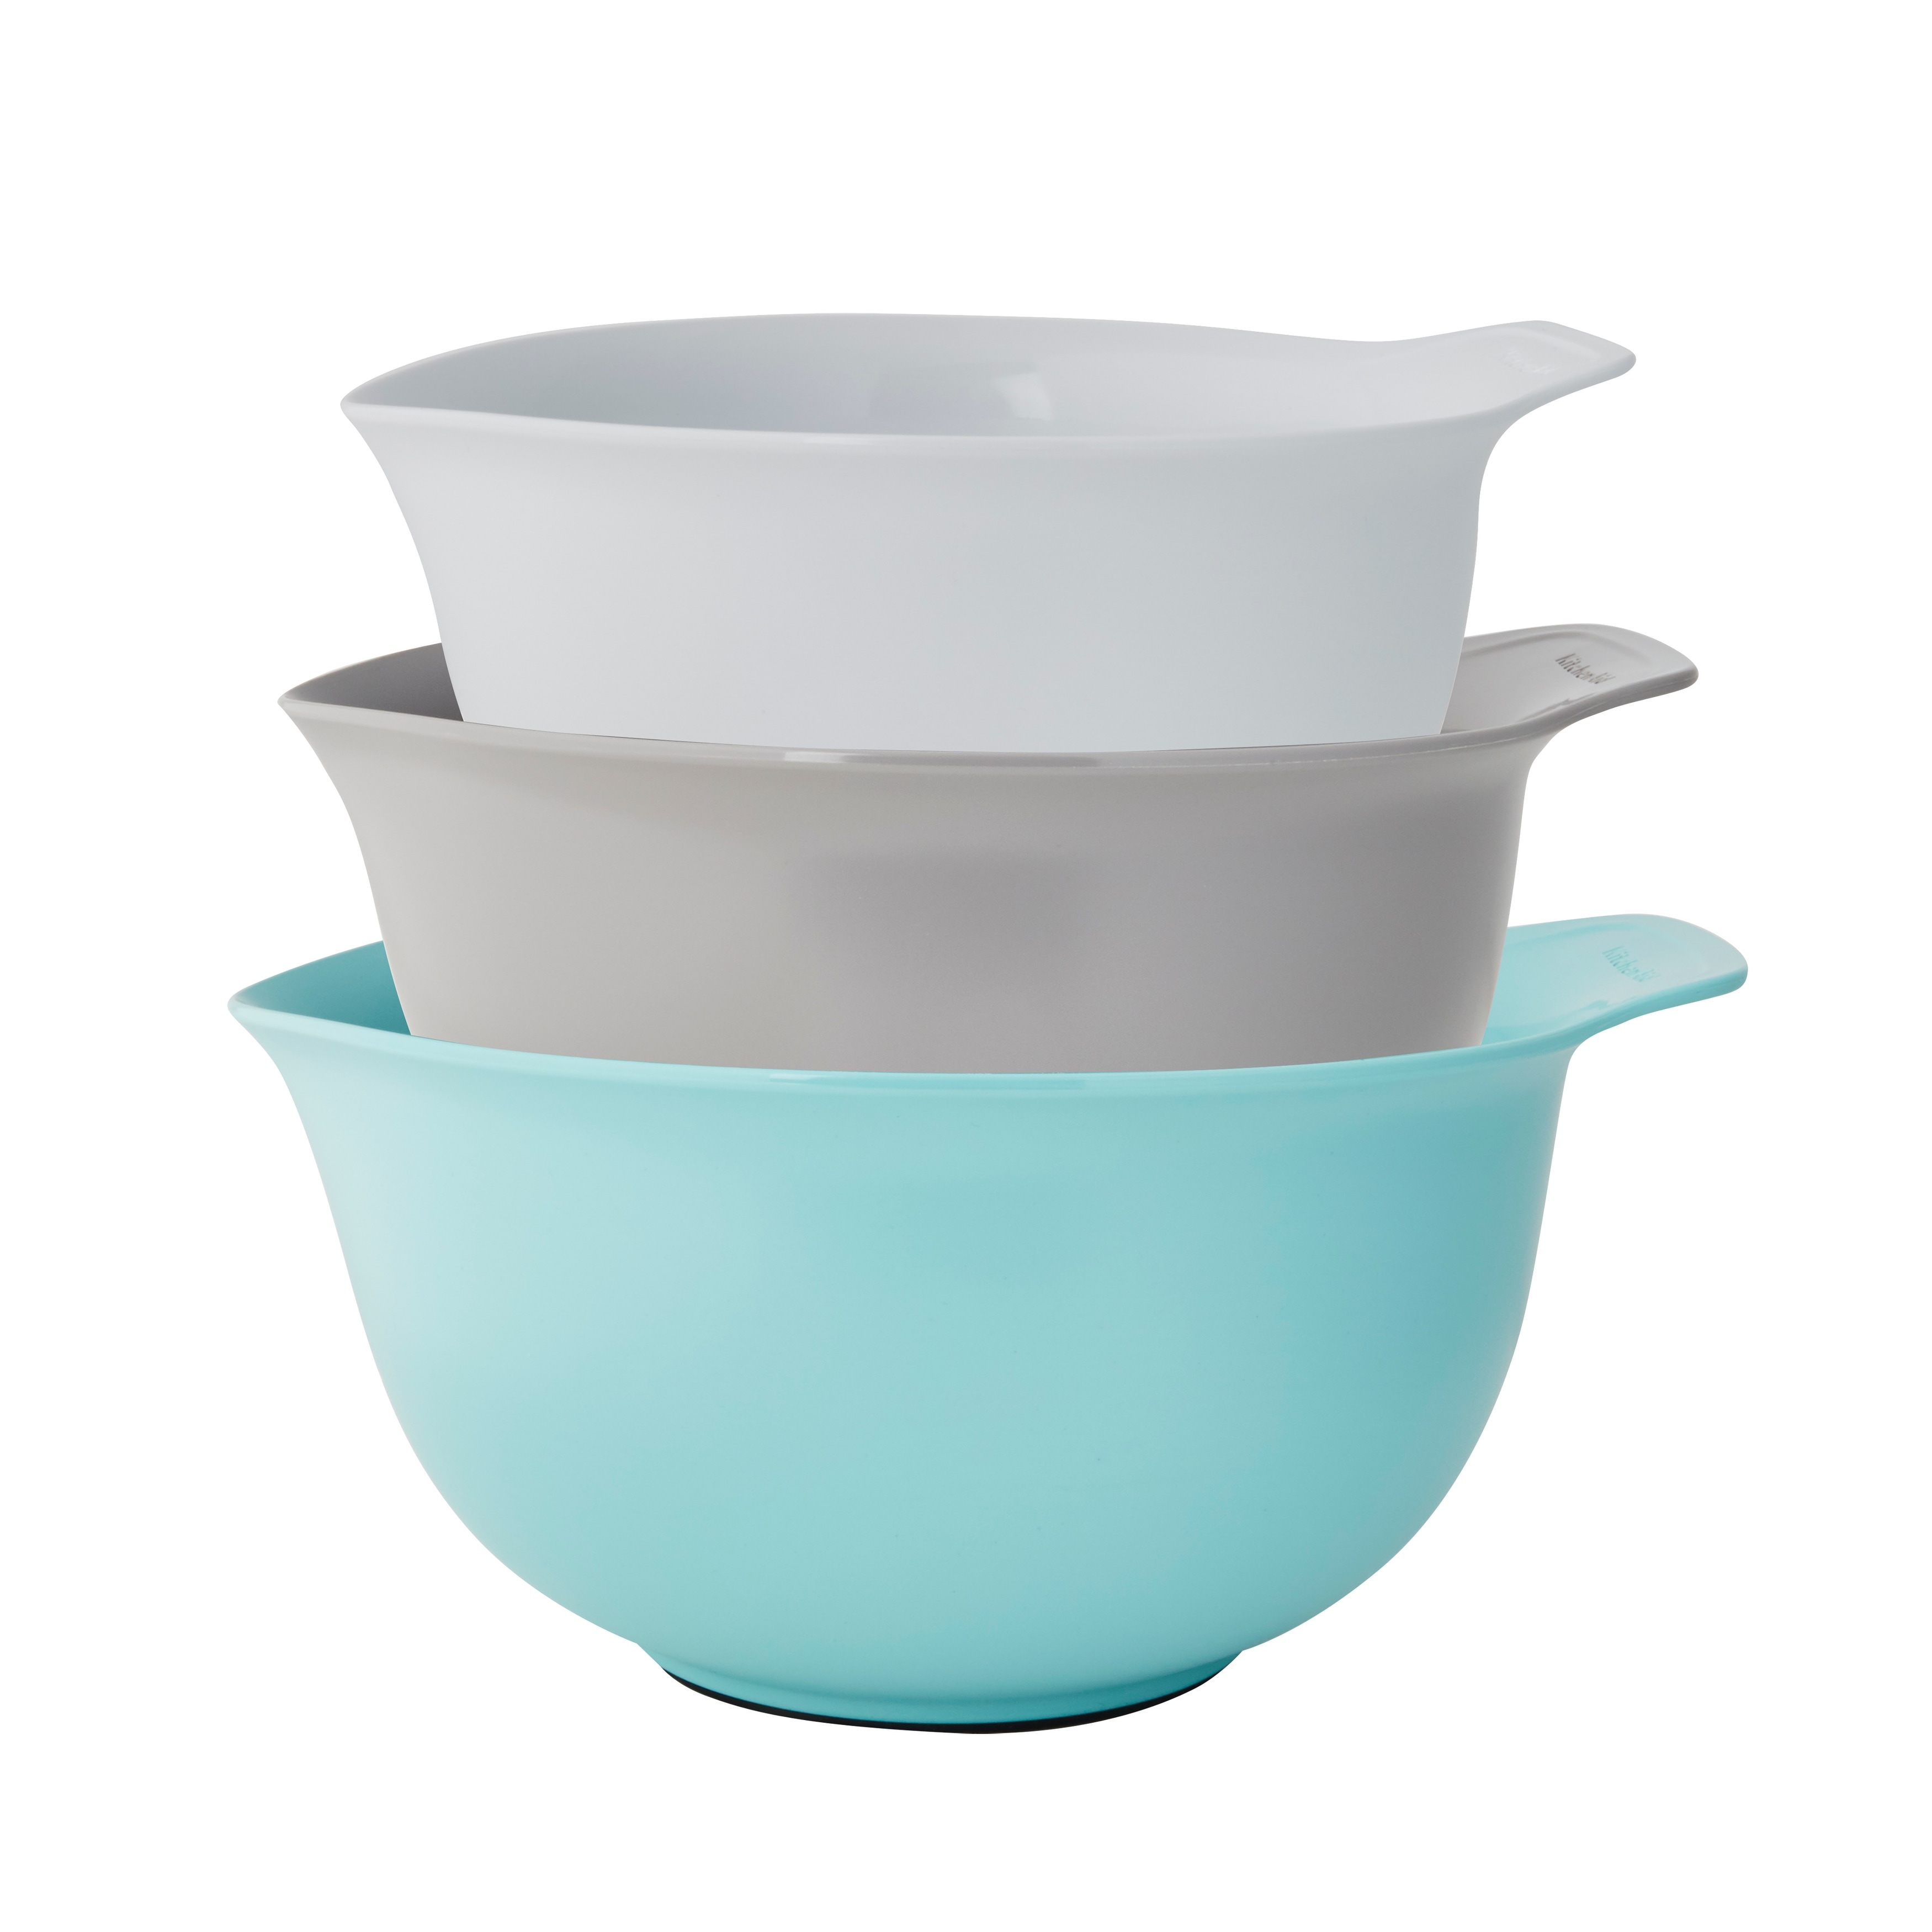 https://ak1.ostkcdn.com/images/products/is/images/direct/5a5947f031444f593f60389157389d77d2361a88/KitchenAid-Universal-Mixing-Bowls%2C-Set-Of-3.jpg